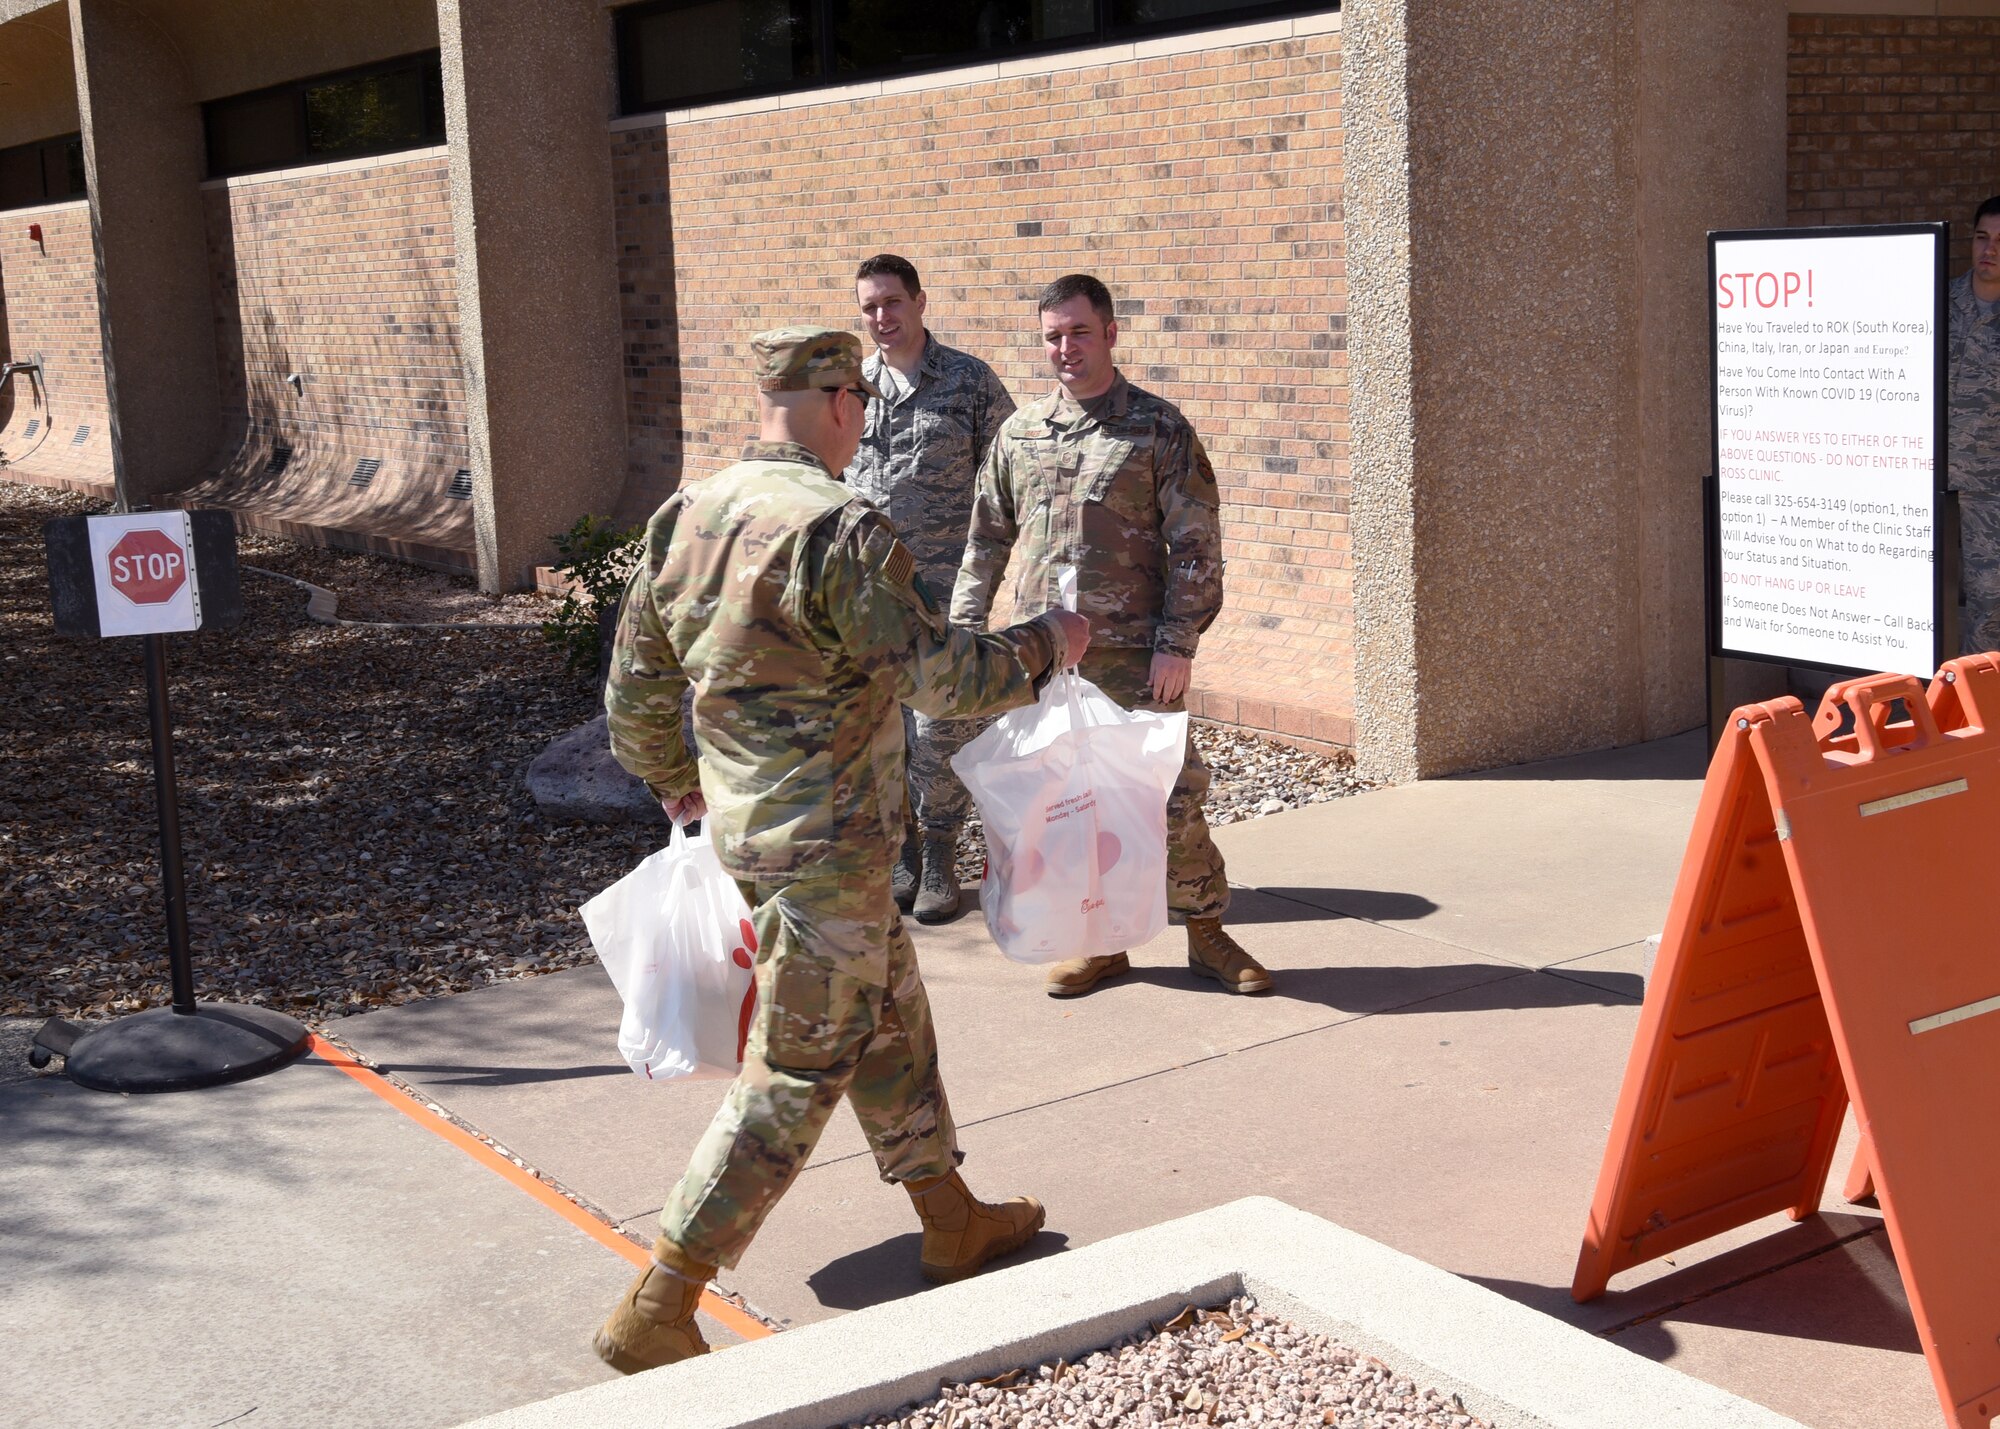 U.S. Air Force Col. Robert Ramirez, 17th Training Wing vice commander, is pre-screened before entering the Ross Clinic with lunch donated by San Angelo community partners for the 17th Medical Group’s staff on Goodfellow Air Force Base, Texas, March 20, 2020. With Goodfellow’s Health Protection Condition (HPCON) in BRAVO, all patients entering the clinic are asked if they exhibit symptoms related to the COVID-19 pandemic. Goodfellow currently has no confirmed COVID-19 cases. (U.S. Air Force photo by Airman 1st Class Abbey Rieves)